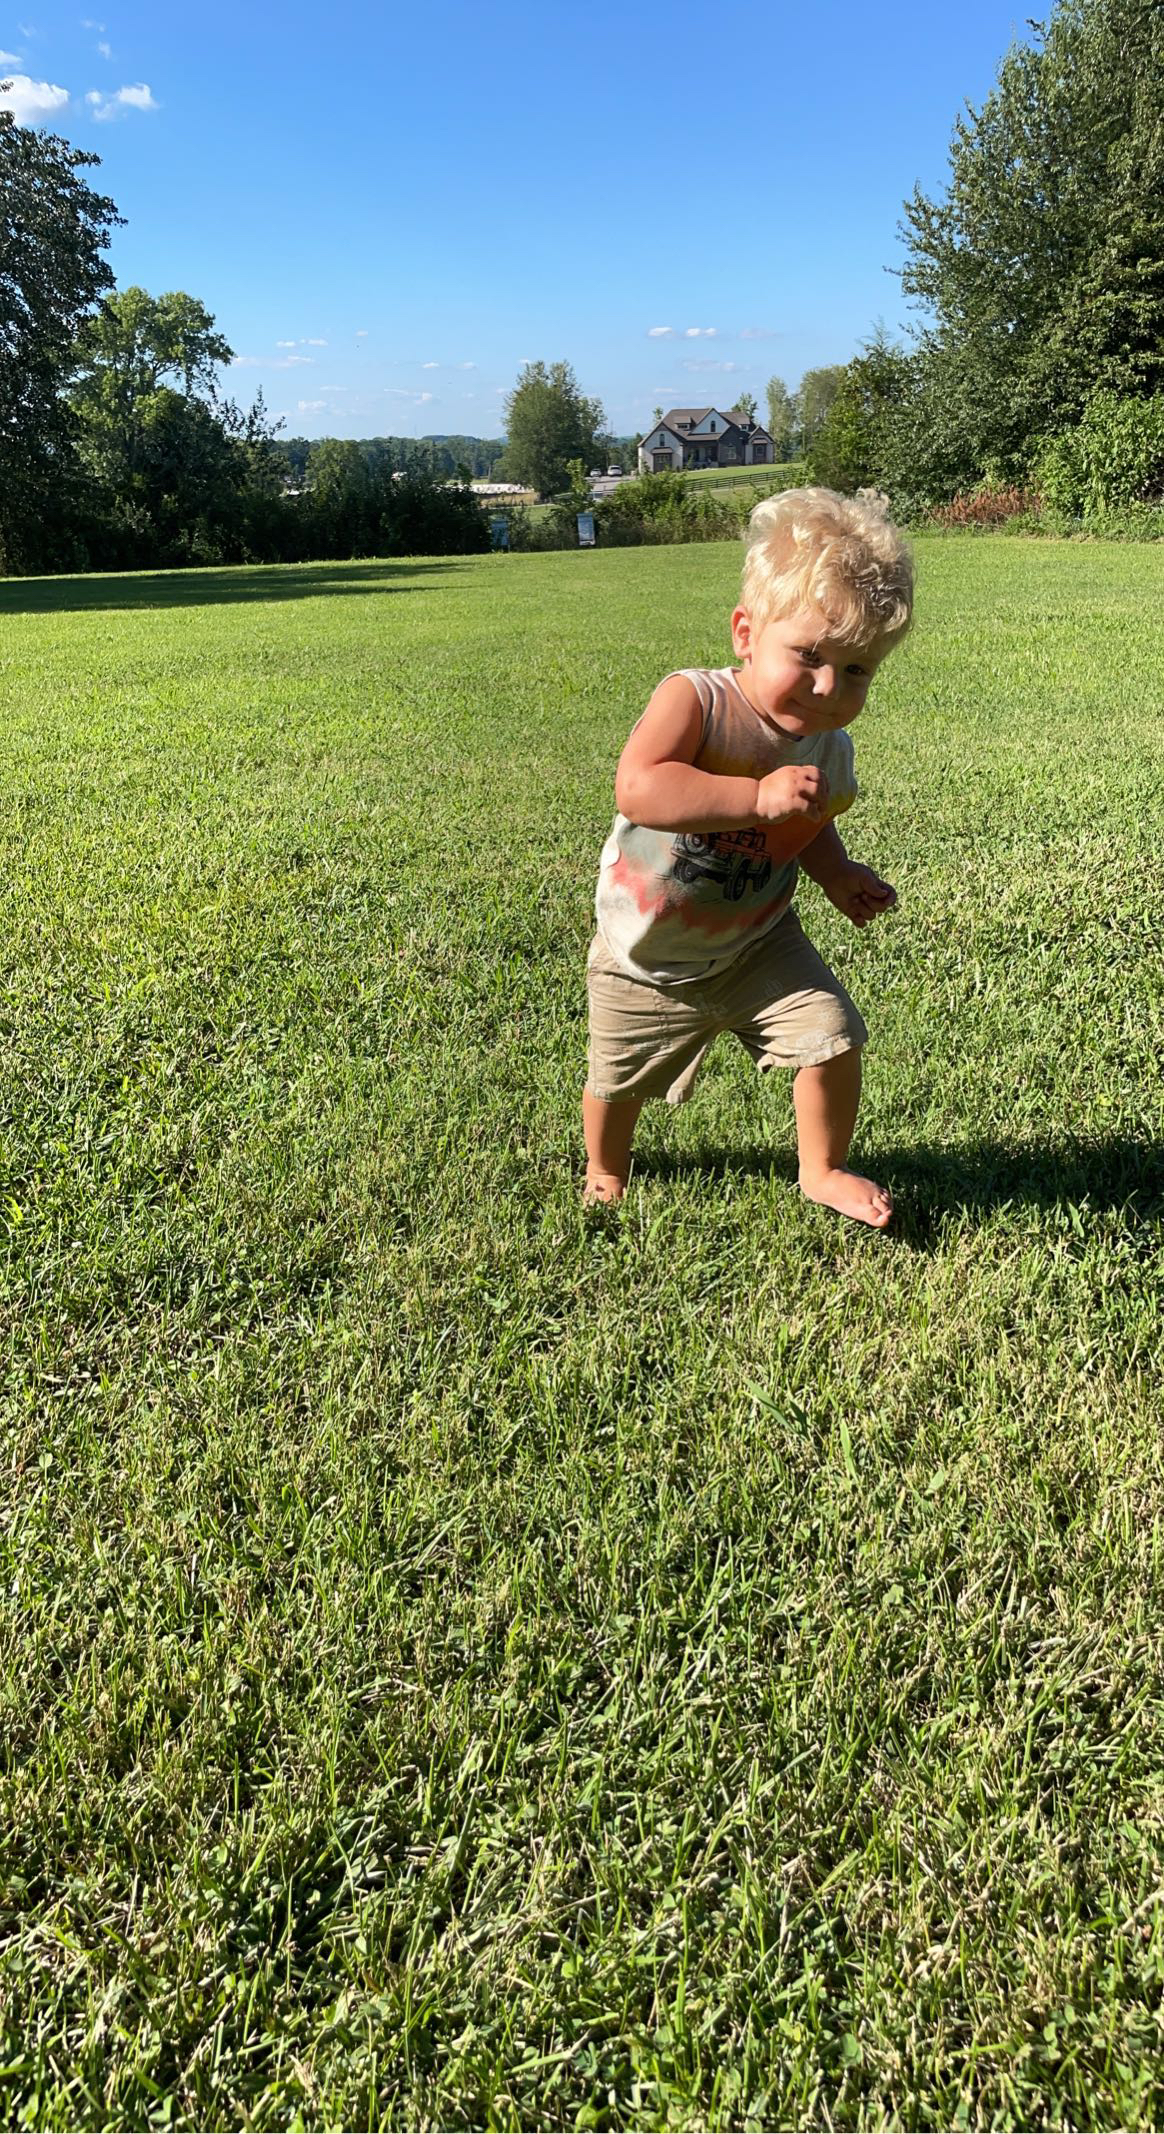 A young boy running in the grass